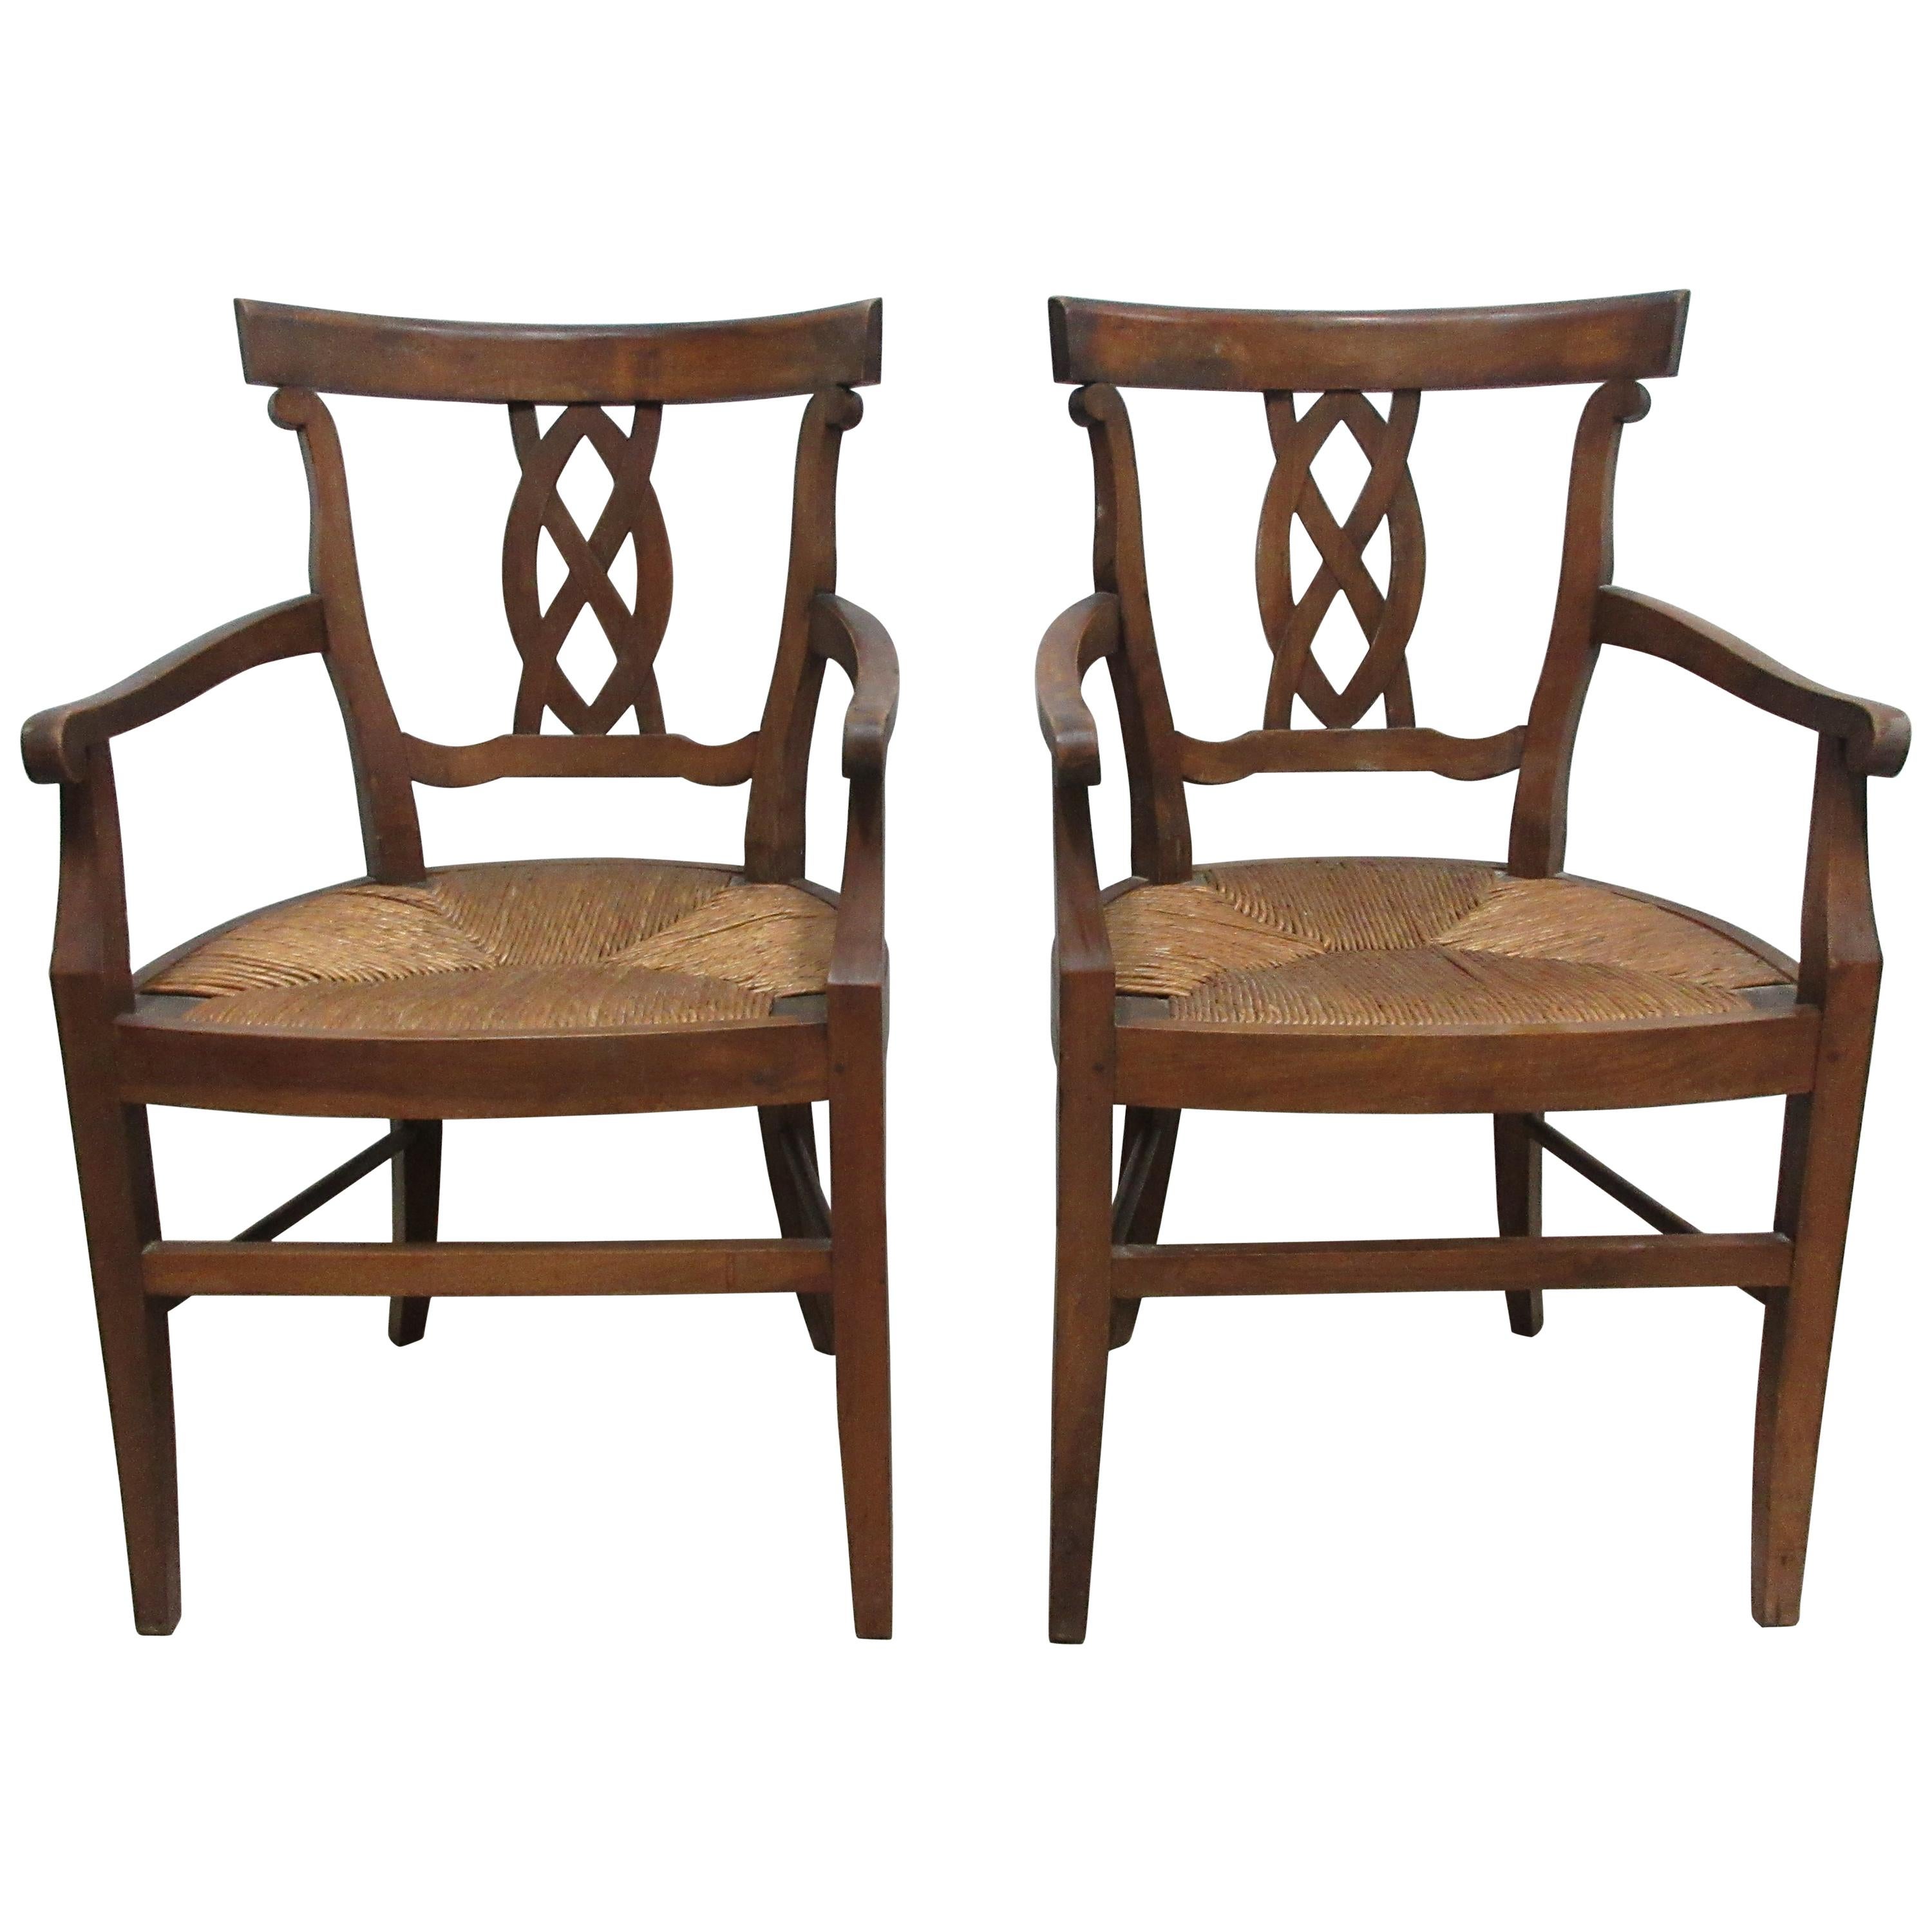 Two Rush Woven Seat Armchairs